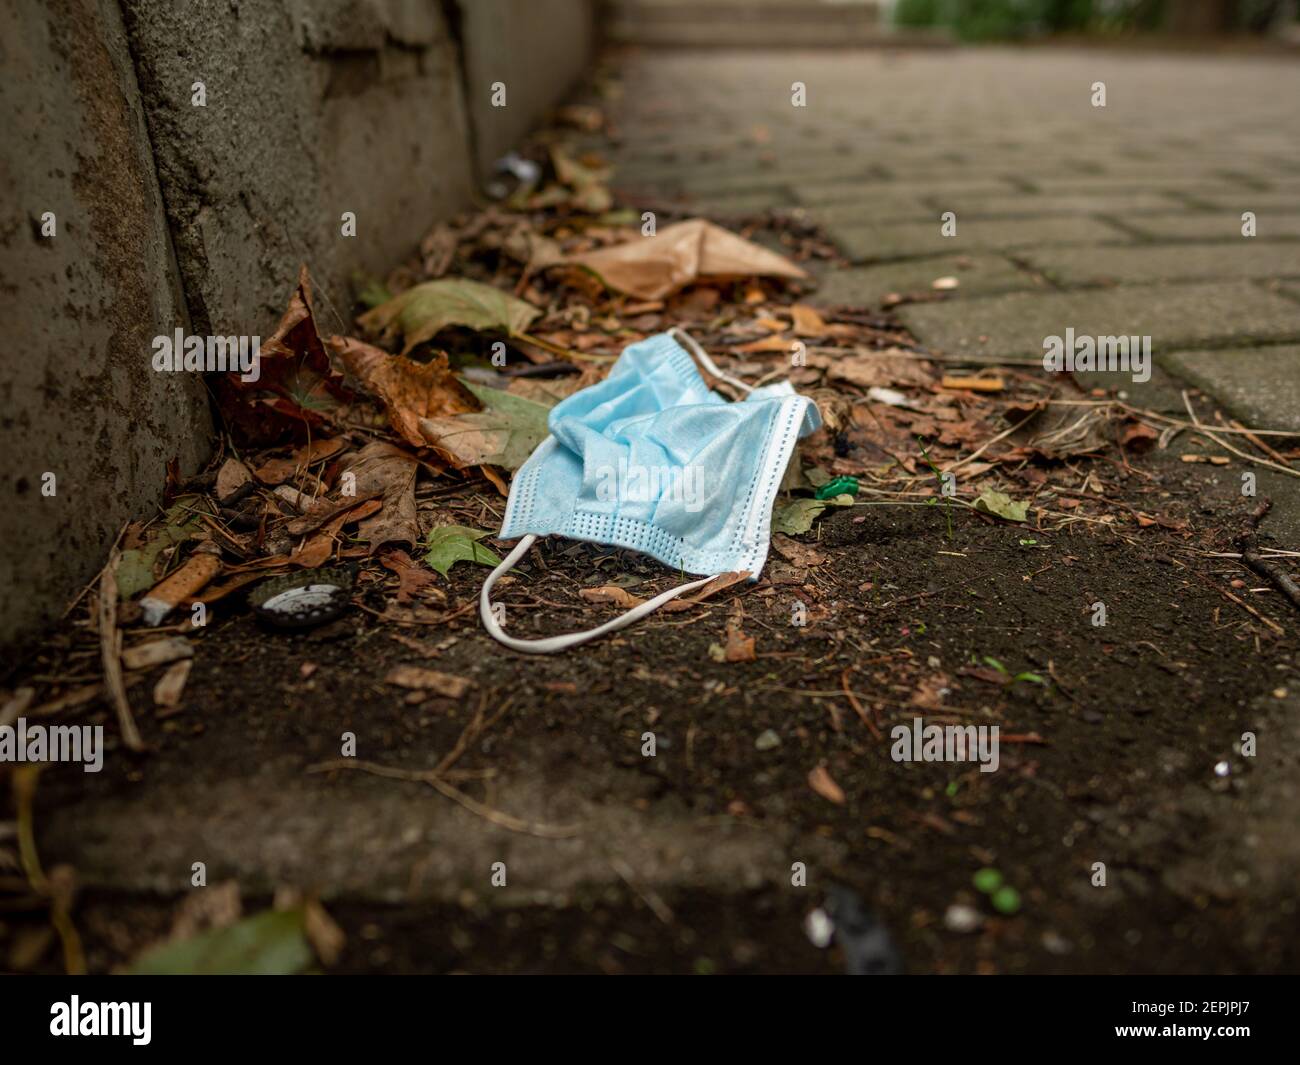 Used face mask next to a sidewalk in an urban area as environmental pollution in a public park plastic waste junk Stock Photo